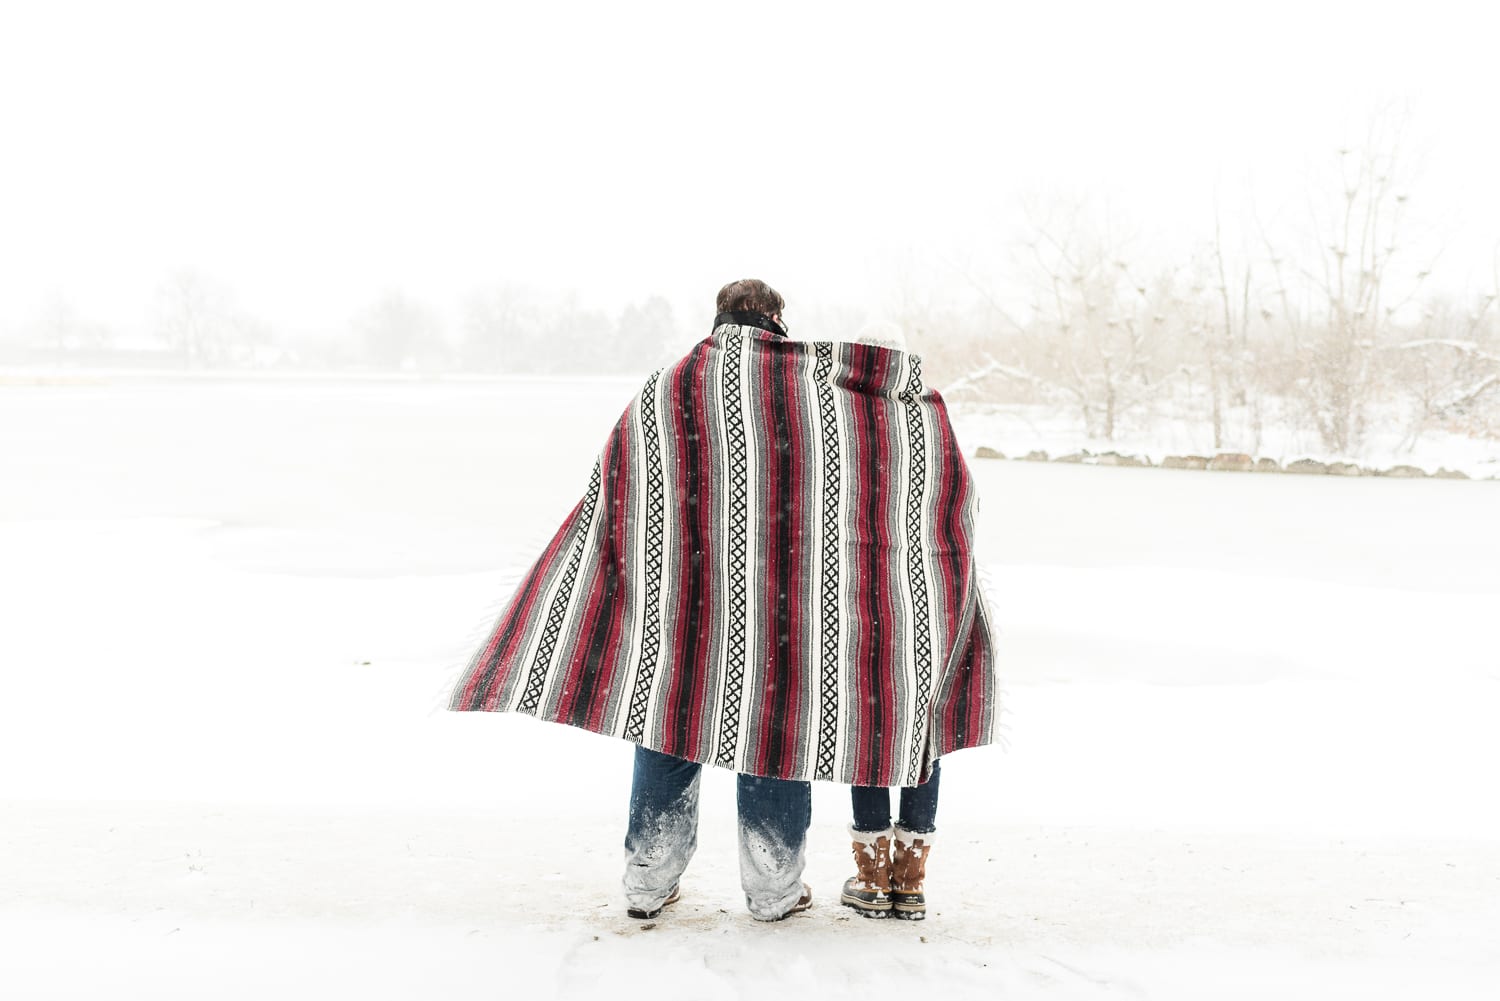 snow day engagement | engagement photography | from the hip photo